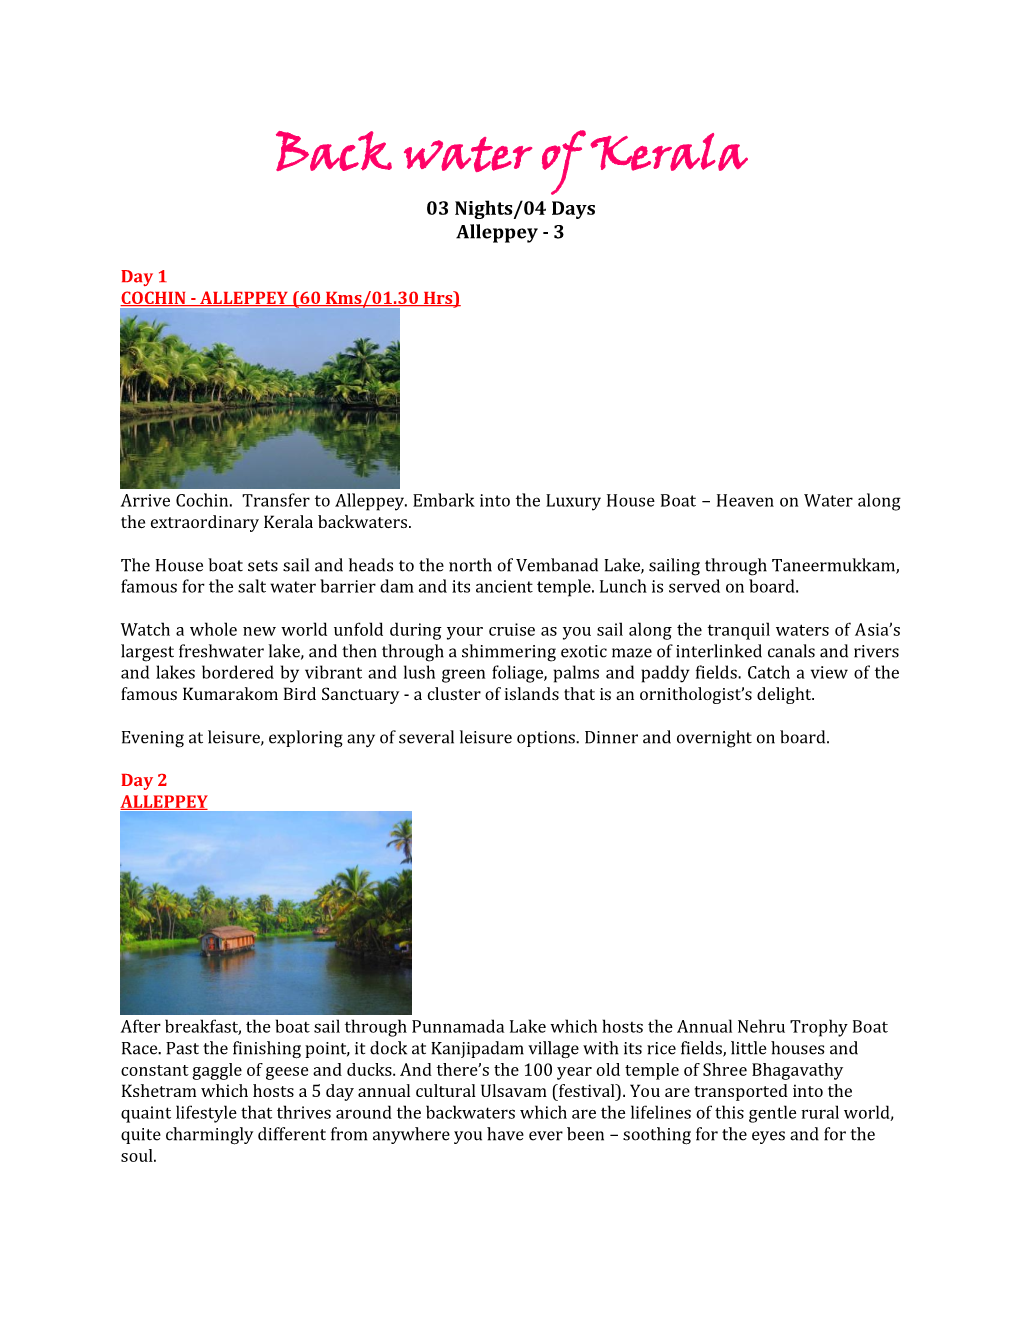 Back Water of Kerala 03 Nights/04 Days Alleppey - 3